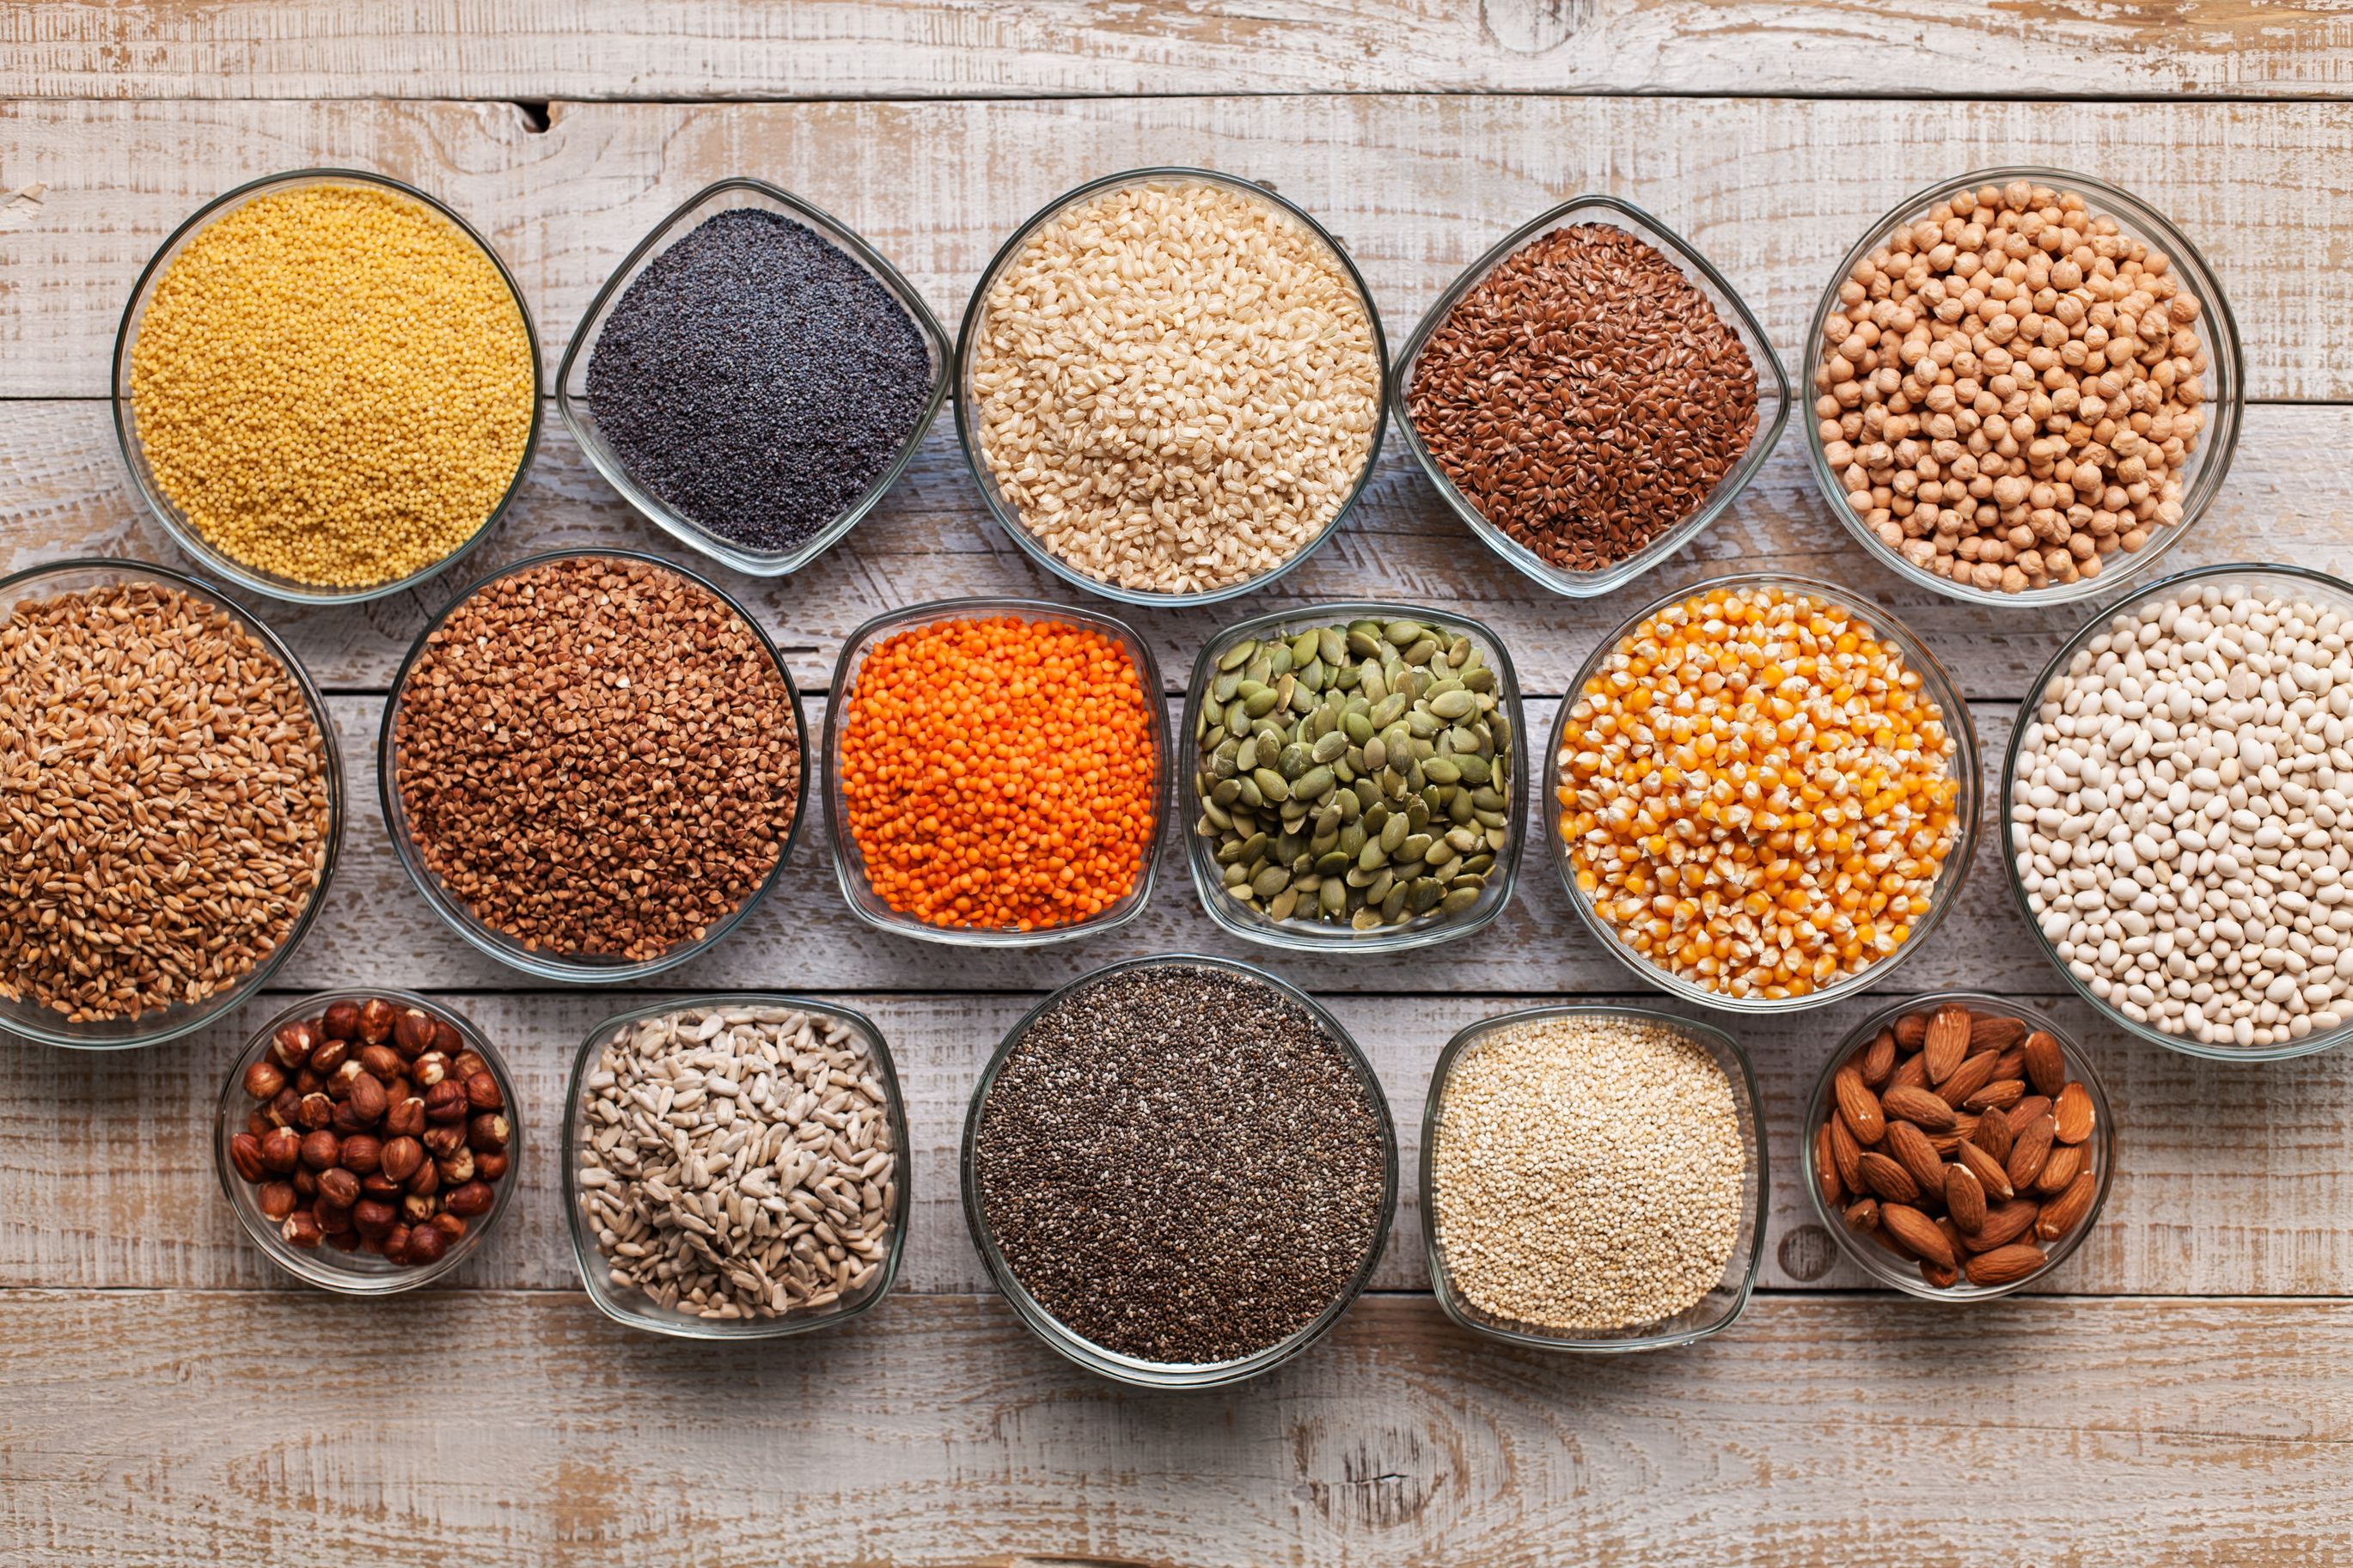 Where is the cheapest place to buy bulk grains and beans?